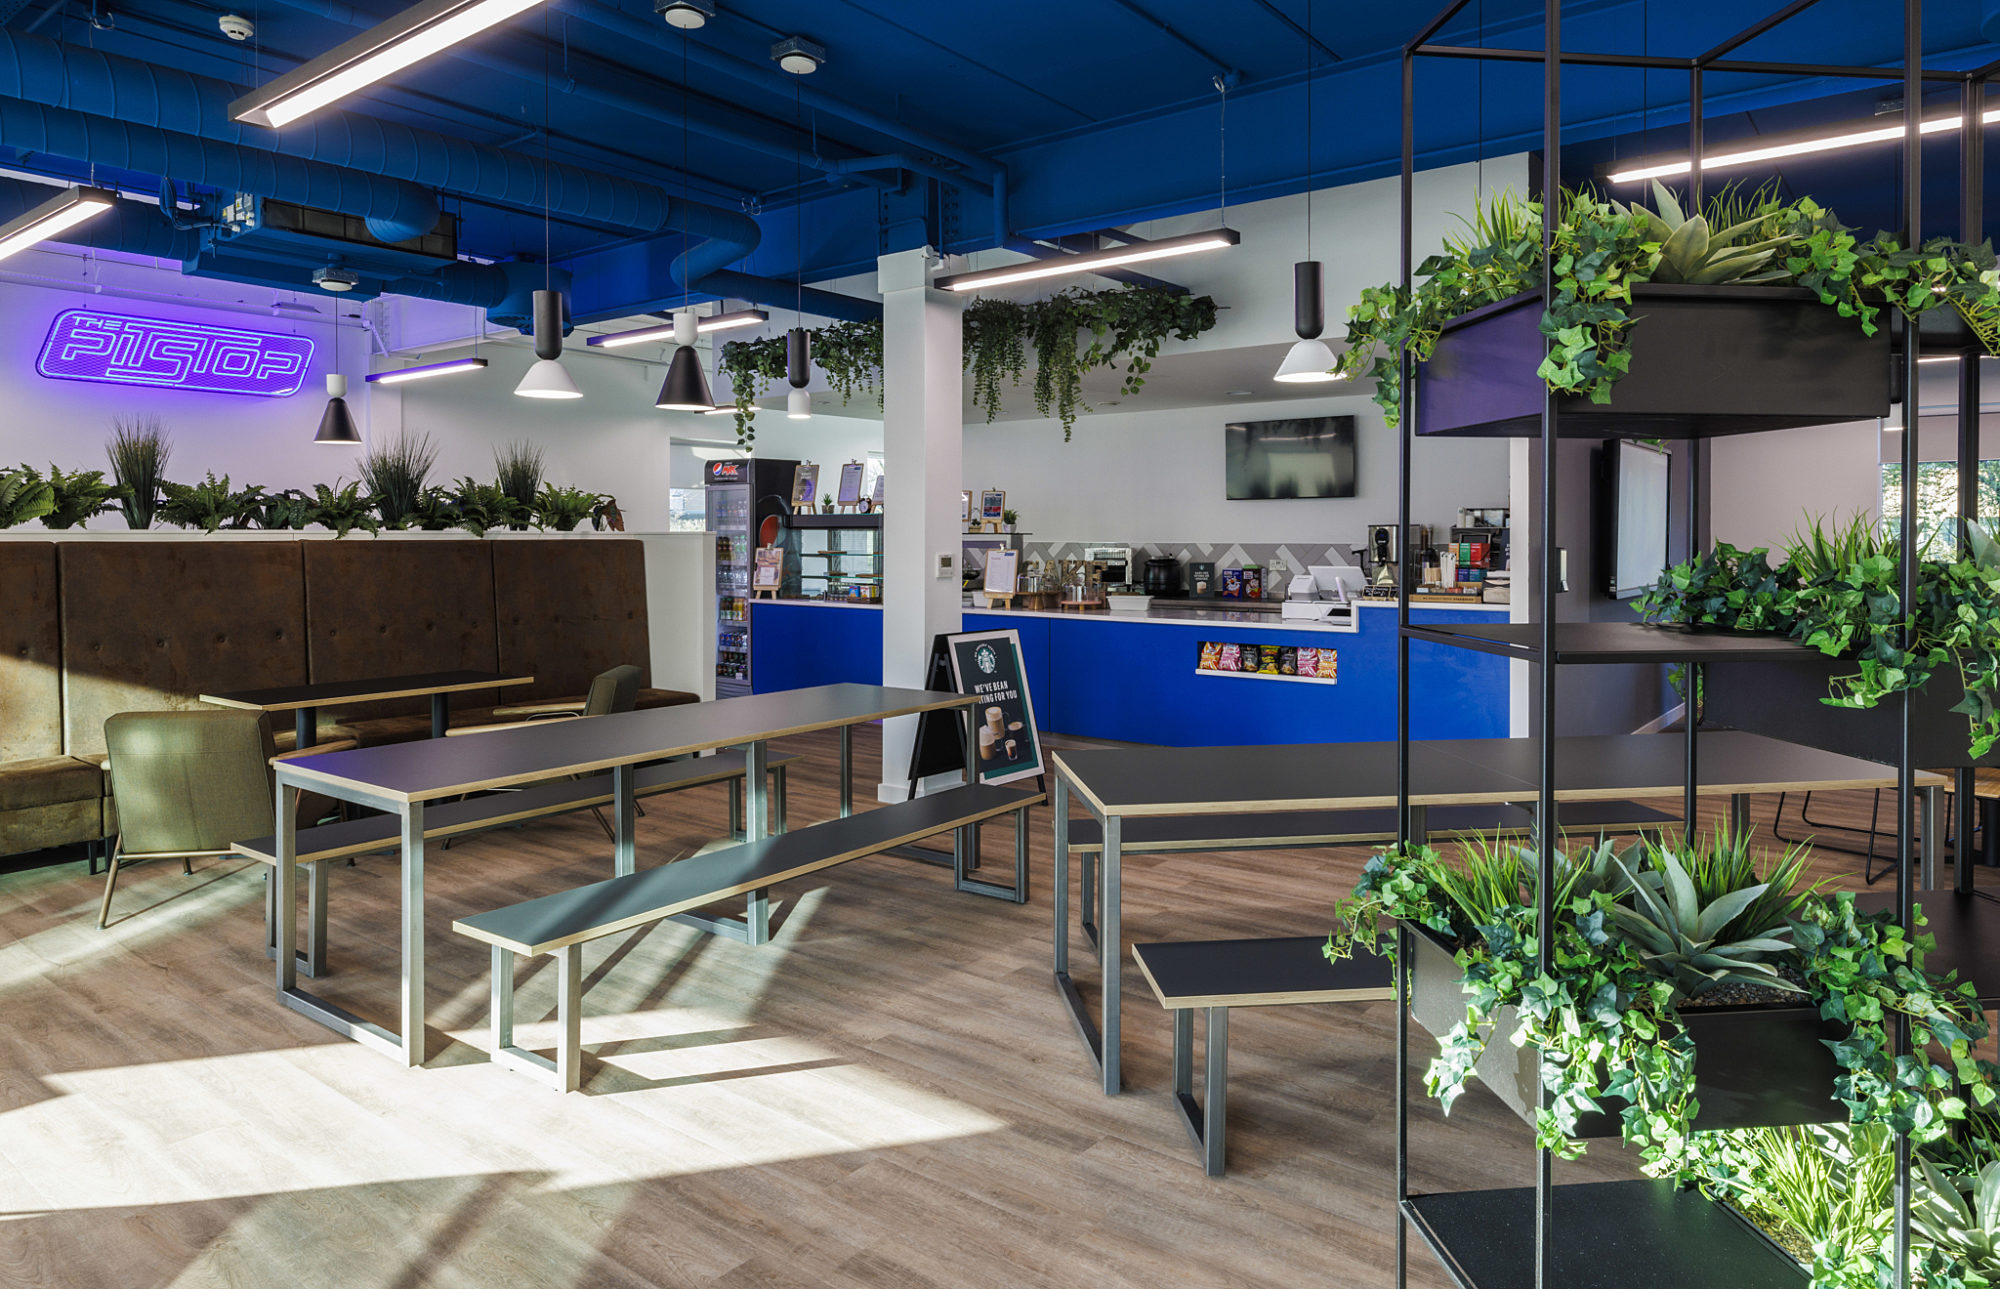 Plants and natural light brings biopilia to office fit out